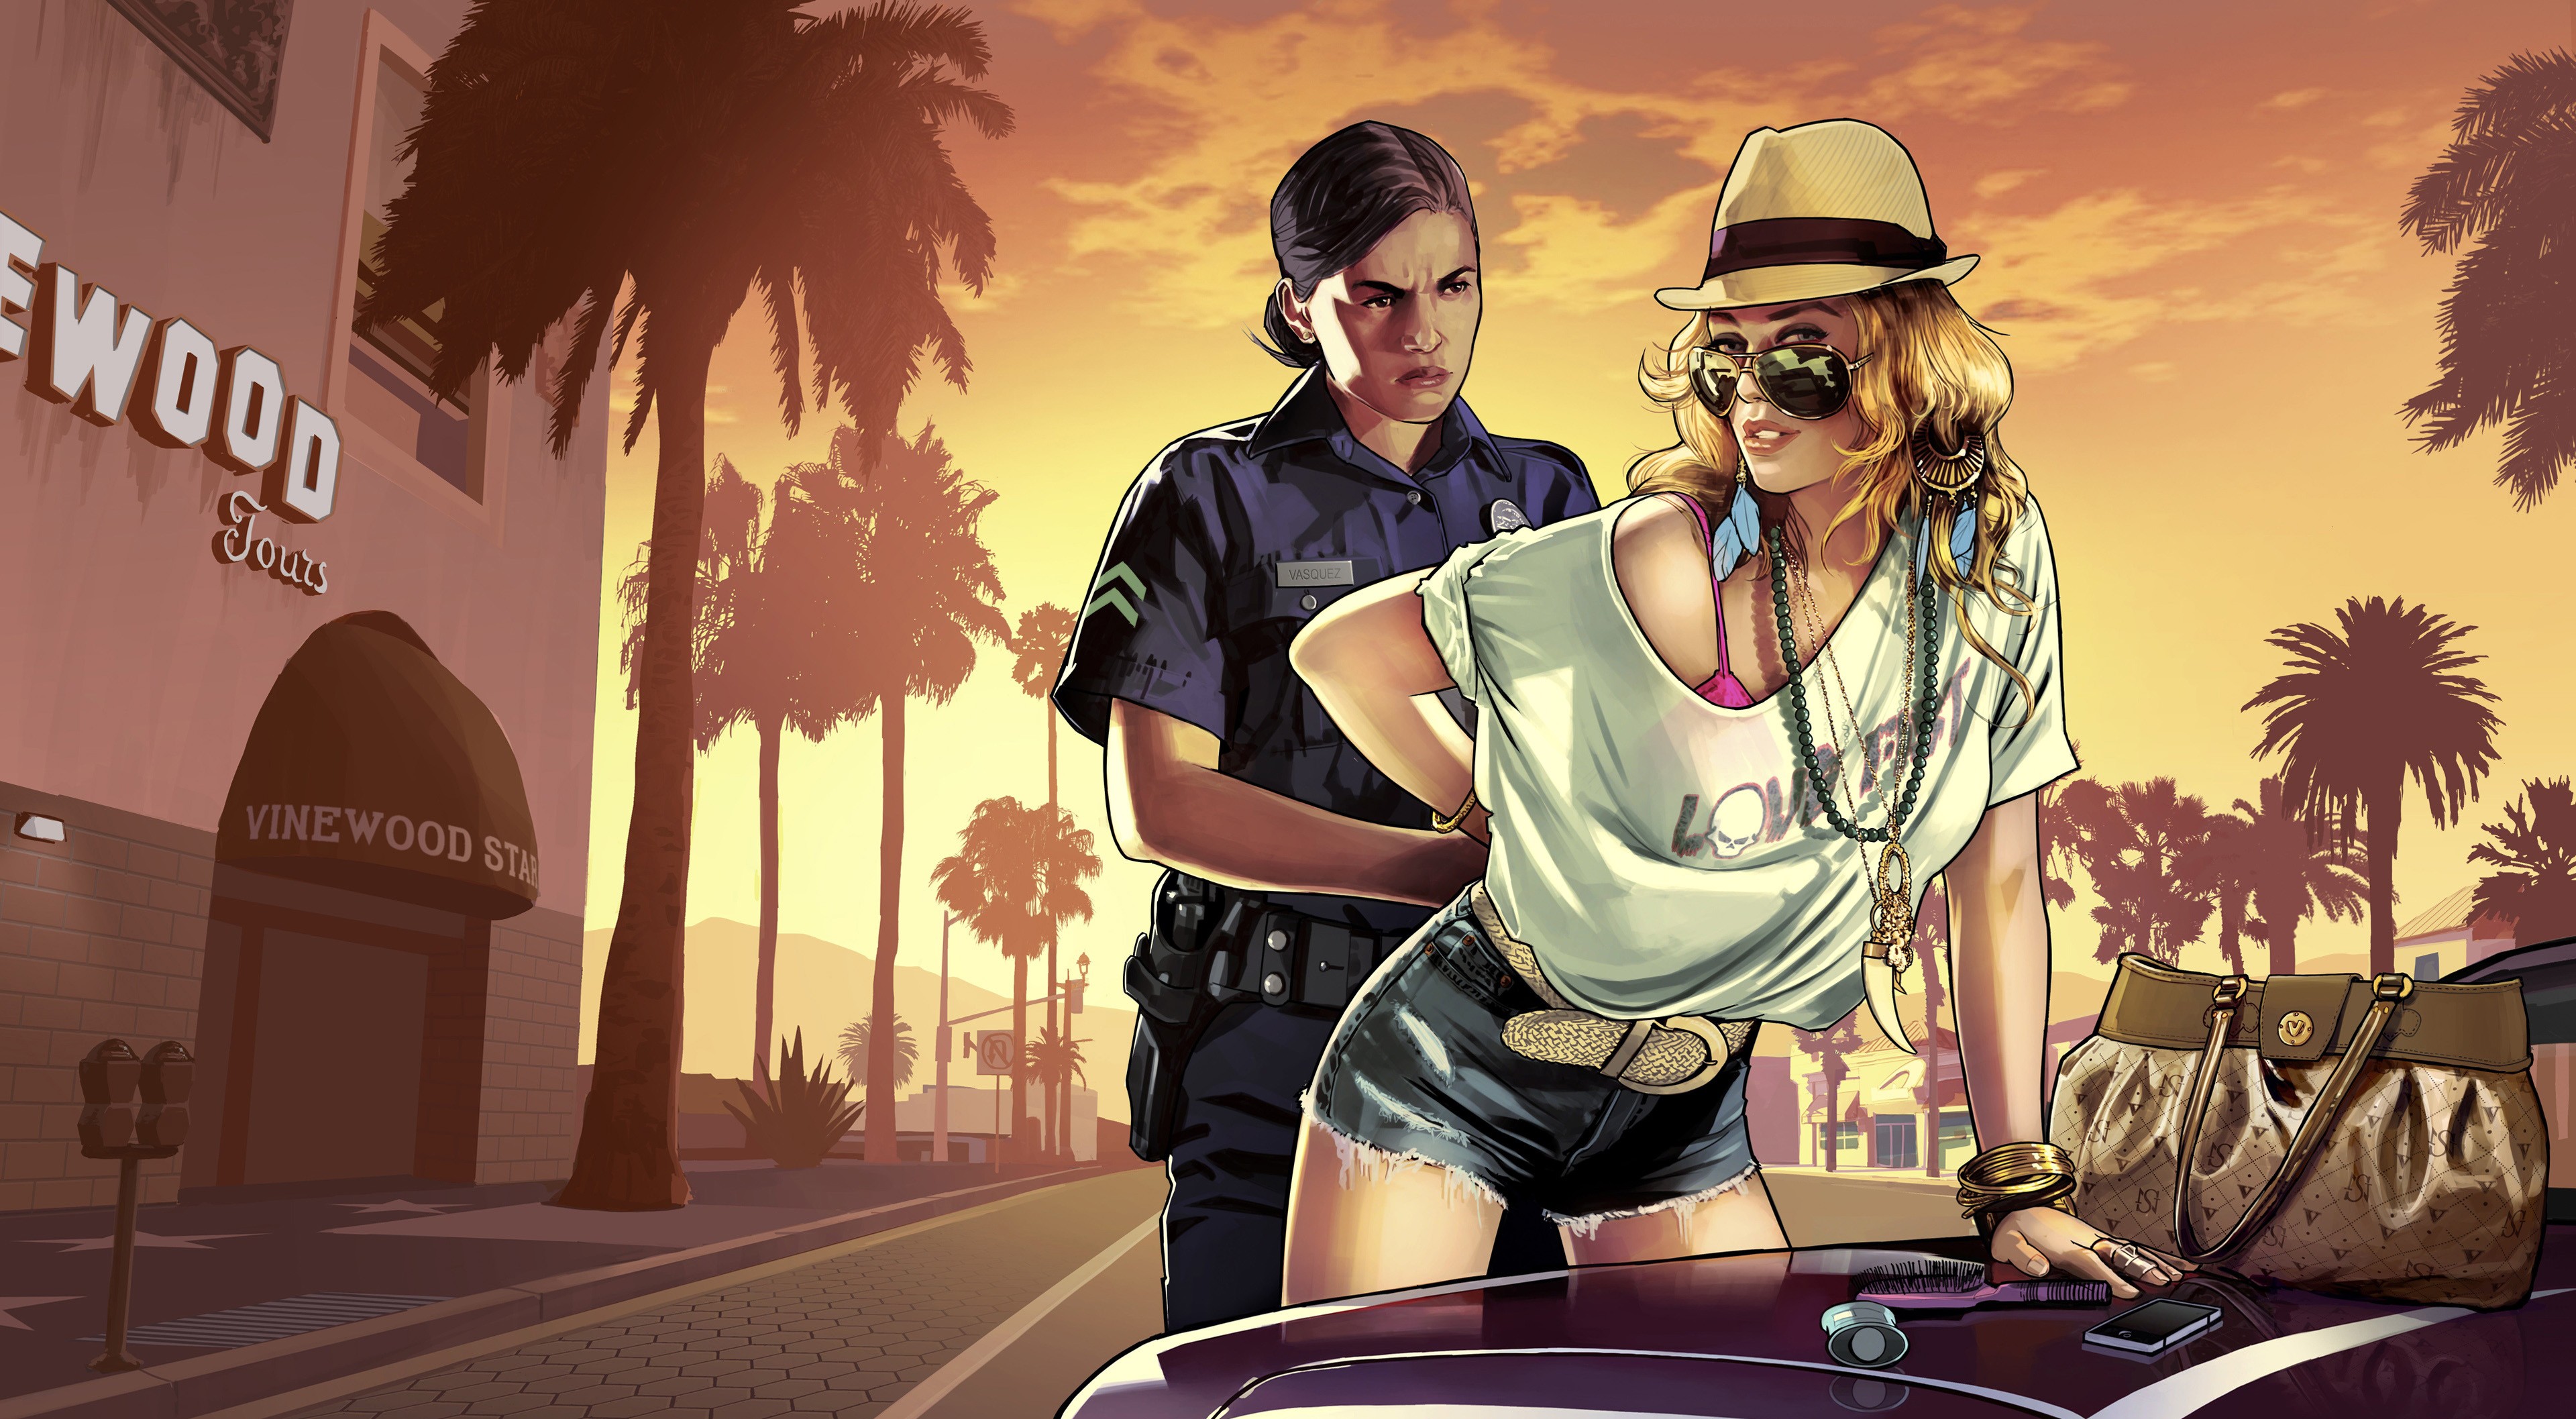 General 3840x2115 Grand Theft Auto V Grand Theft Auto video games video game characters women police women two women video game girls PC gaming hat women with hats Rockstar Games car vehicle women with shades sunglasses